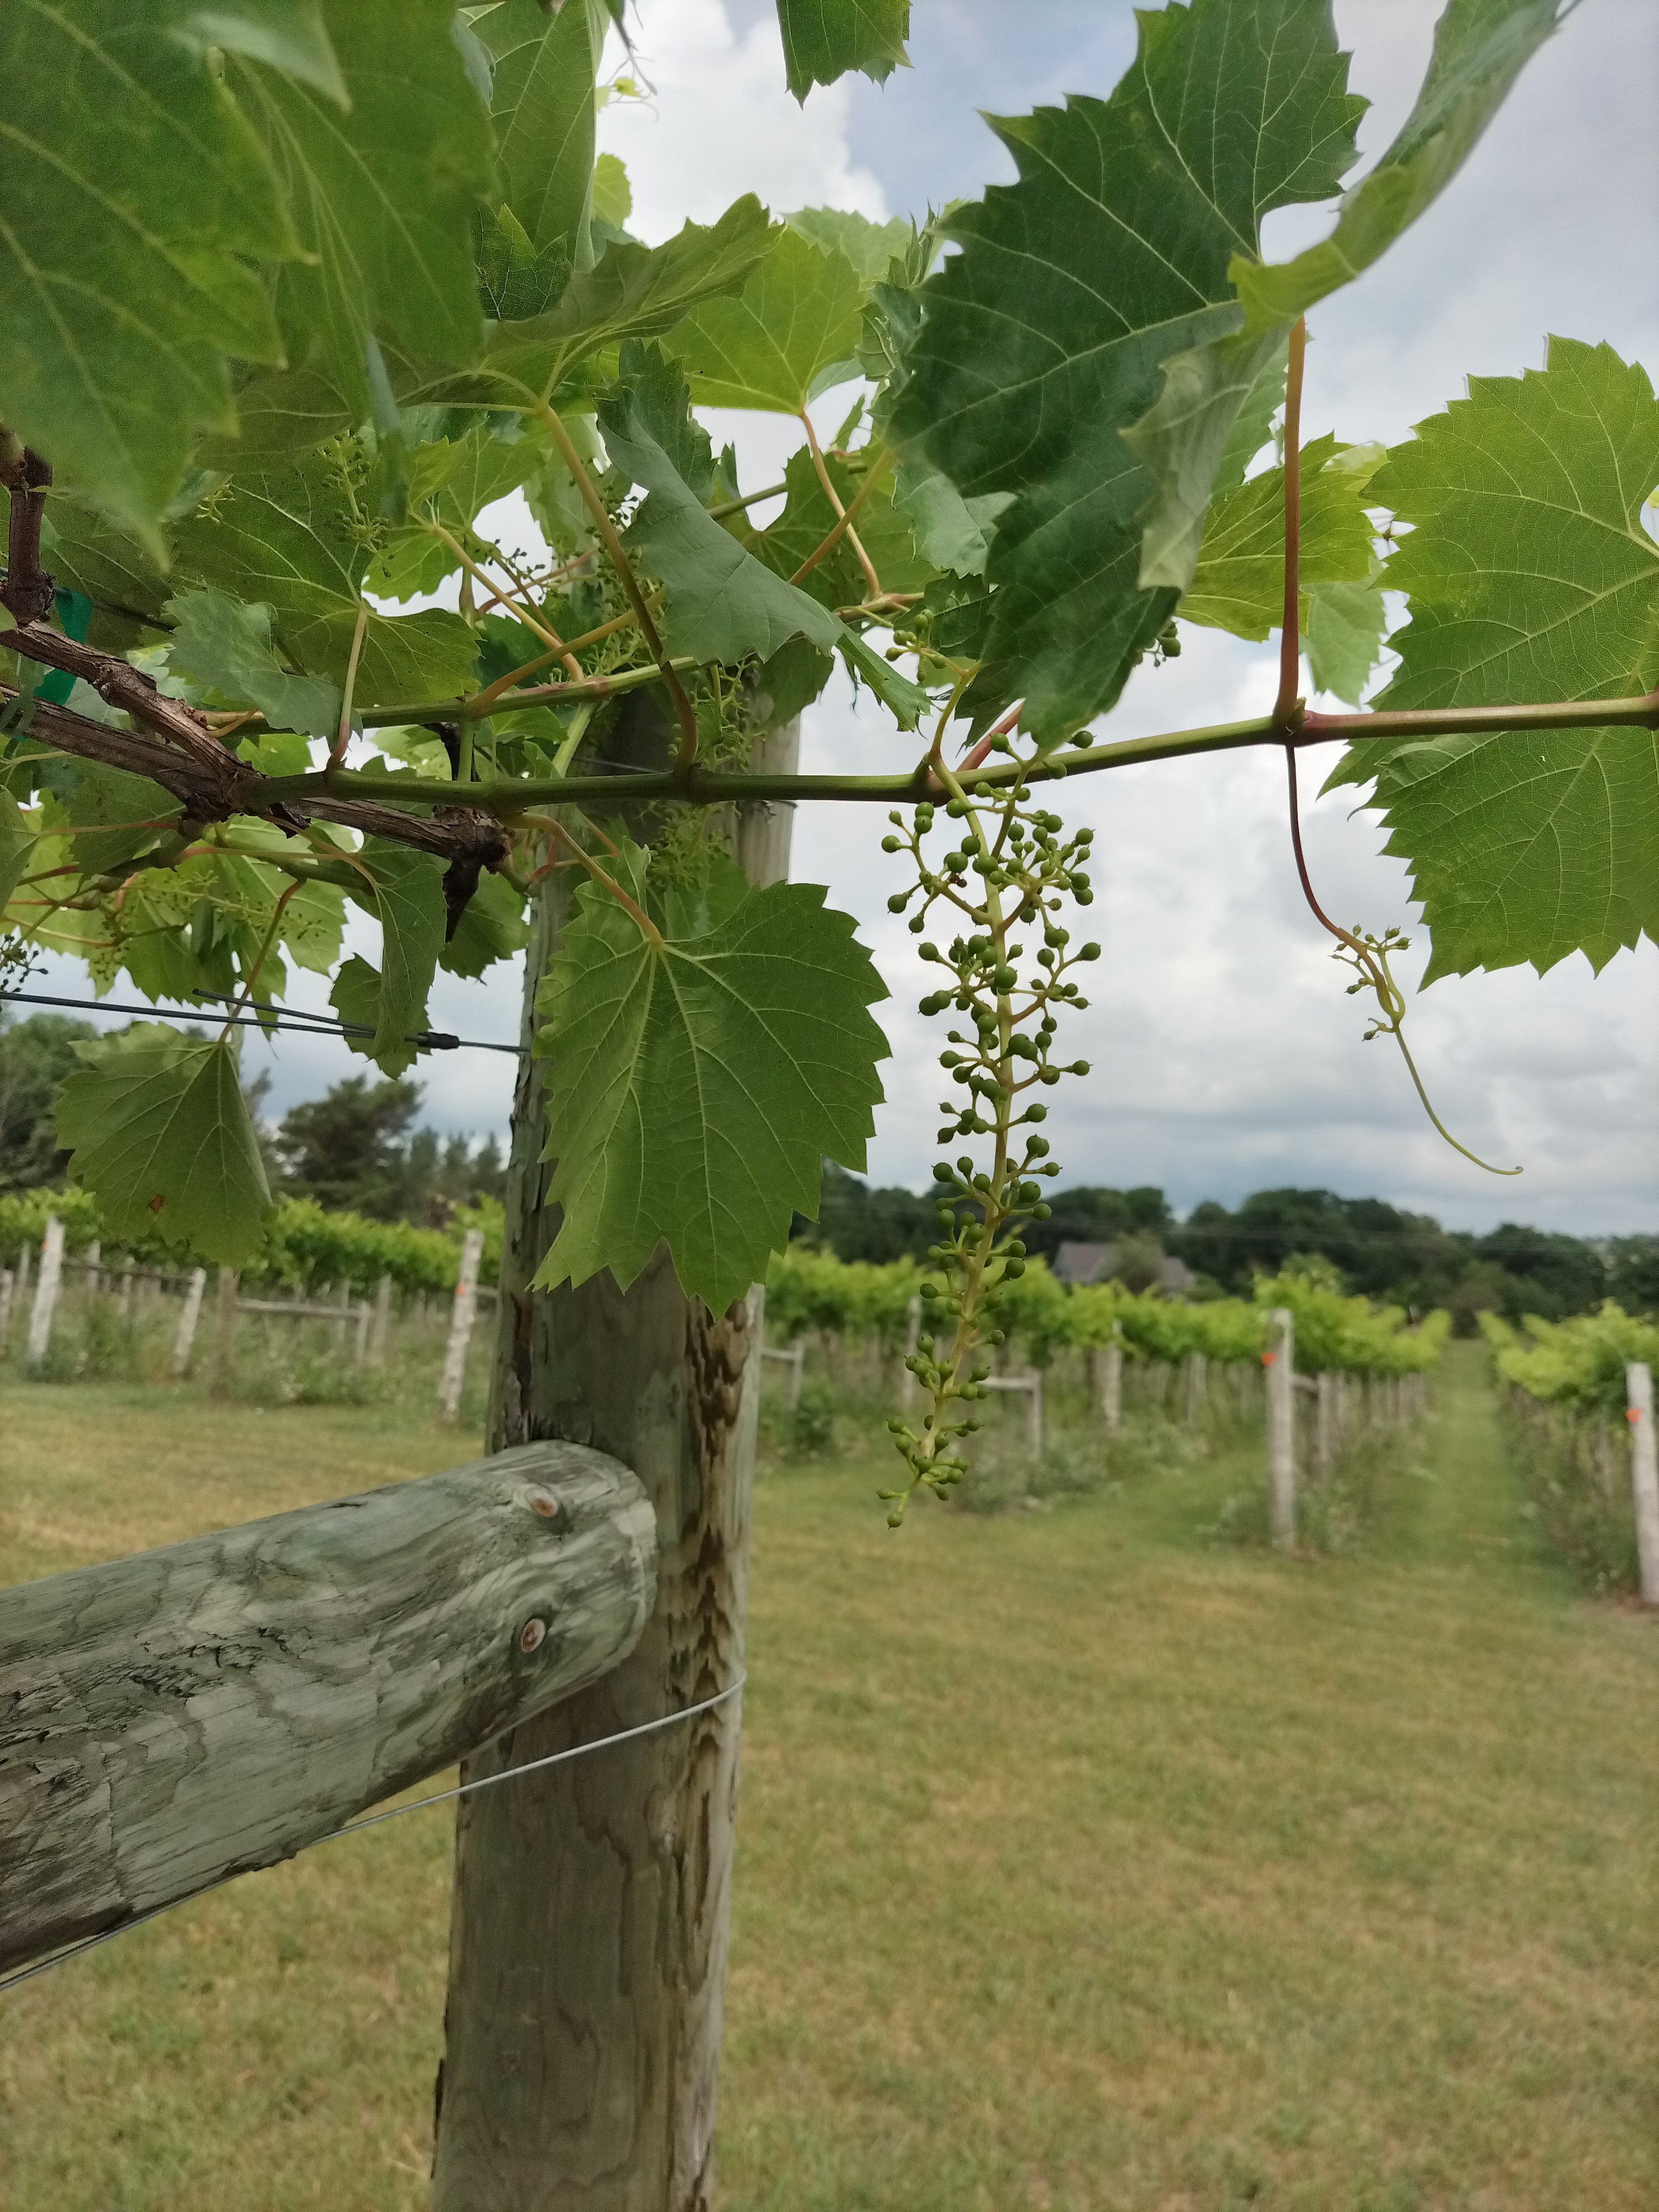 Developing grapes on the vine